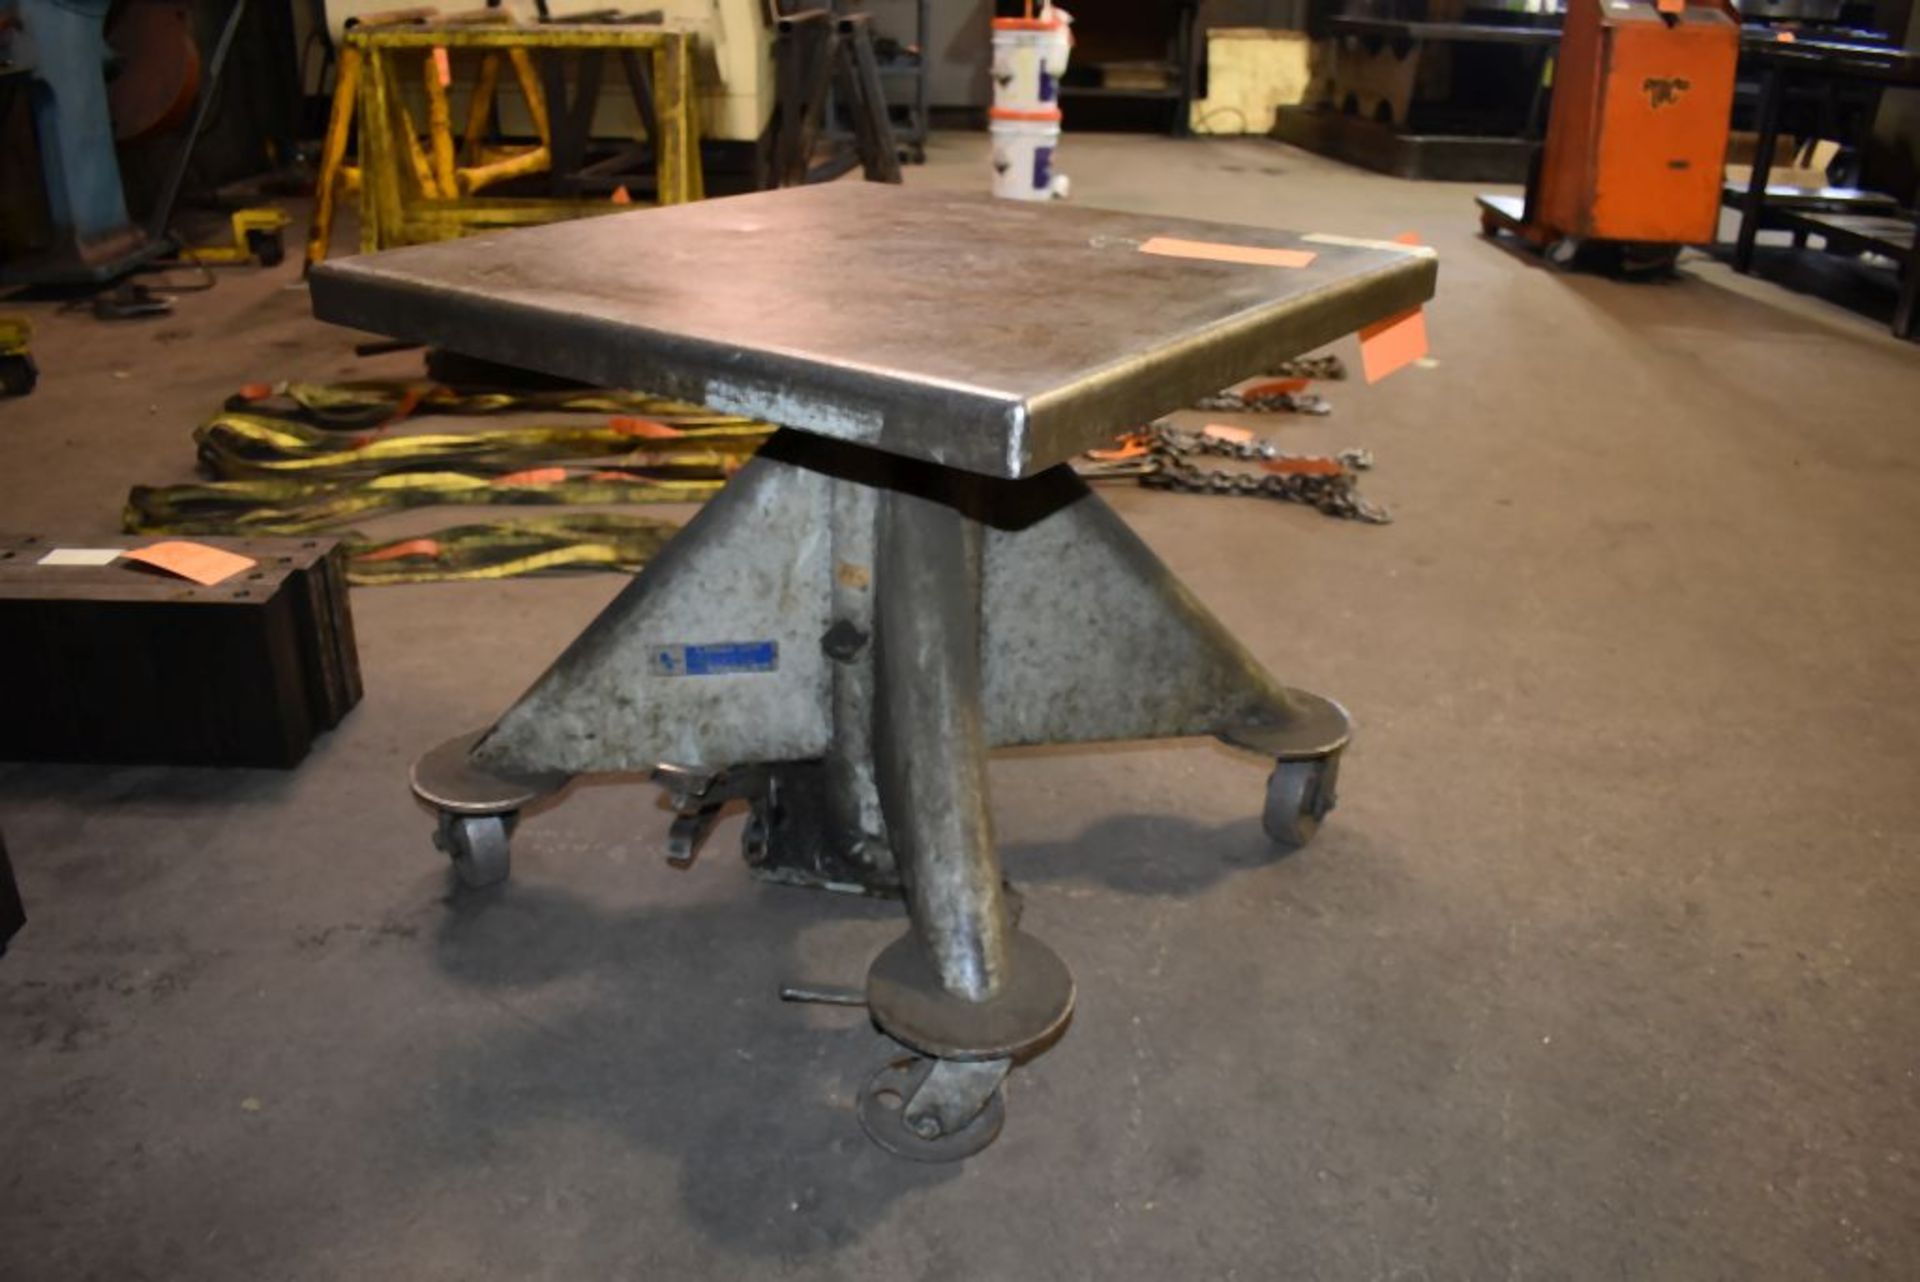 HEAVY DUTY HYDRAULIC ROLLING WORK TABLE, 30" x 30", NO CONTENTS